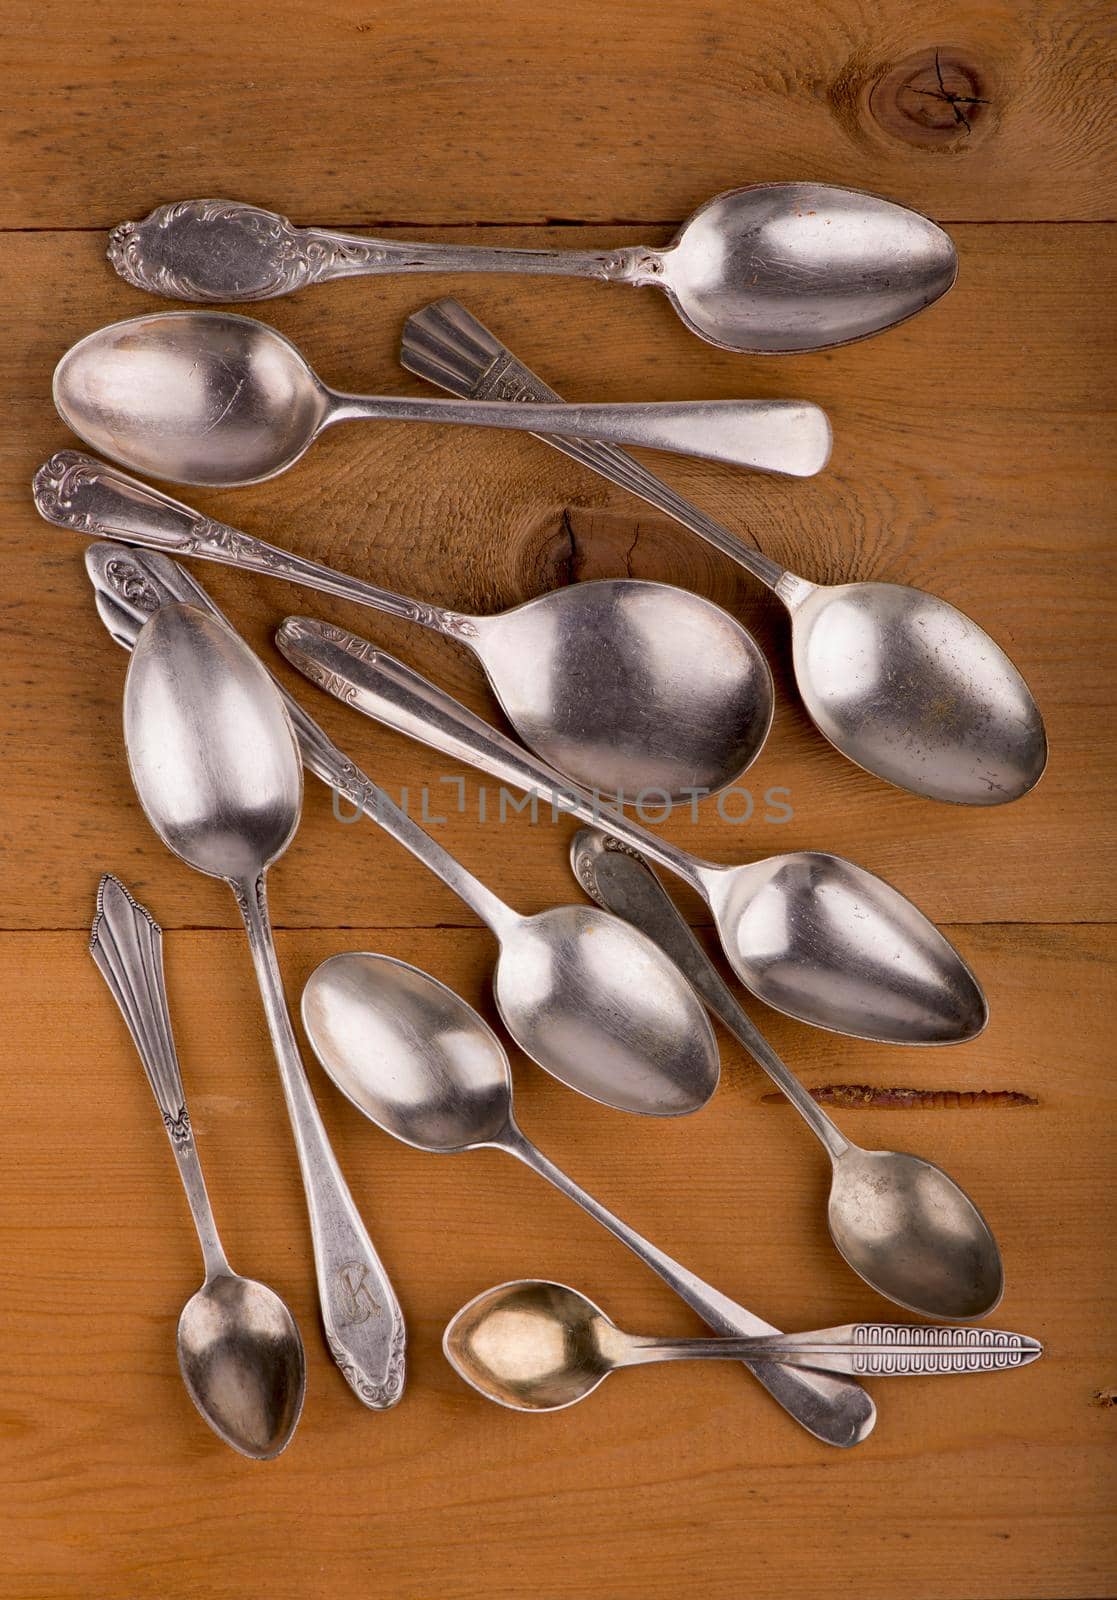 Vintage cutlery. different spoons on wooden background. Antique silverware. Retro. by aprilphoto